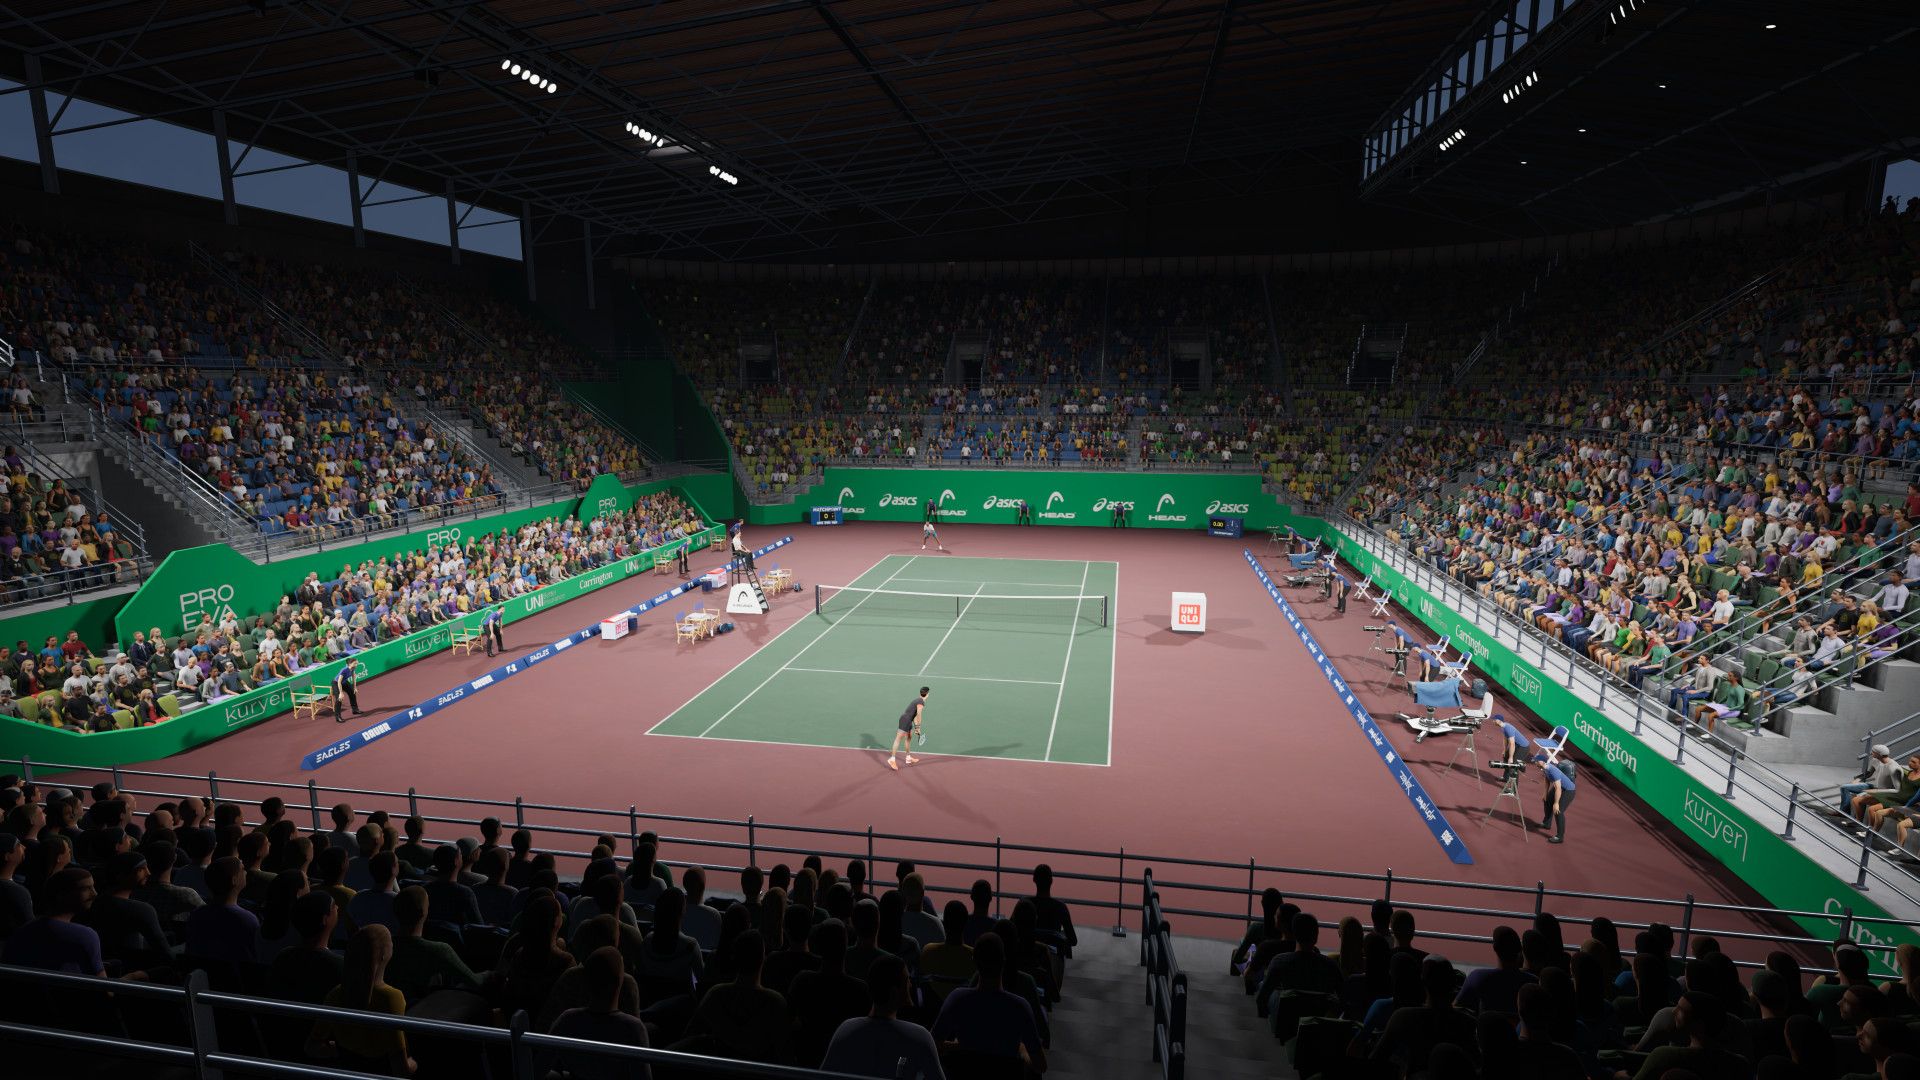 Game, Set, Match How to Play Like a Real Tennis Star in Matchpoint - Tennis Championships